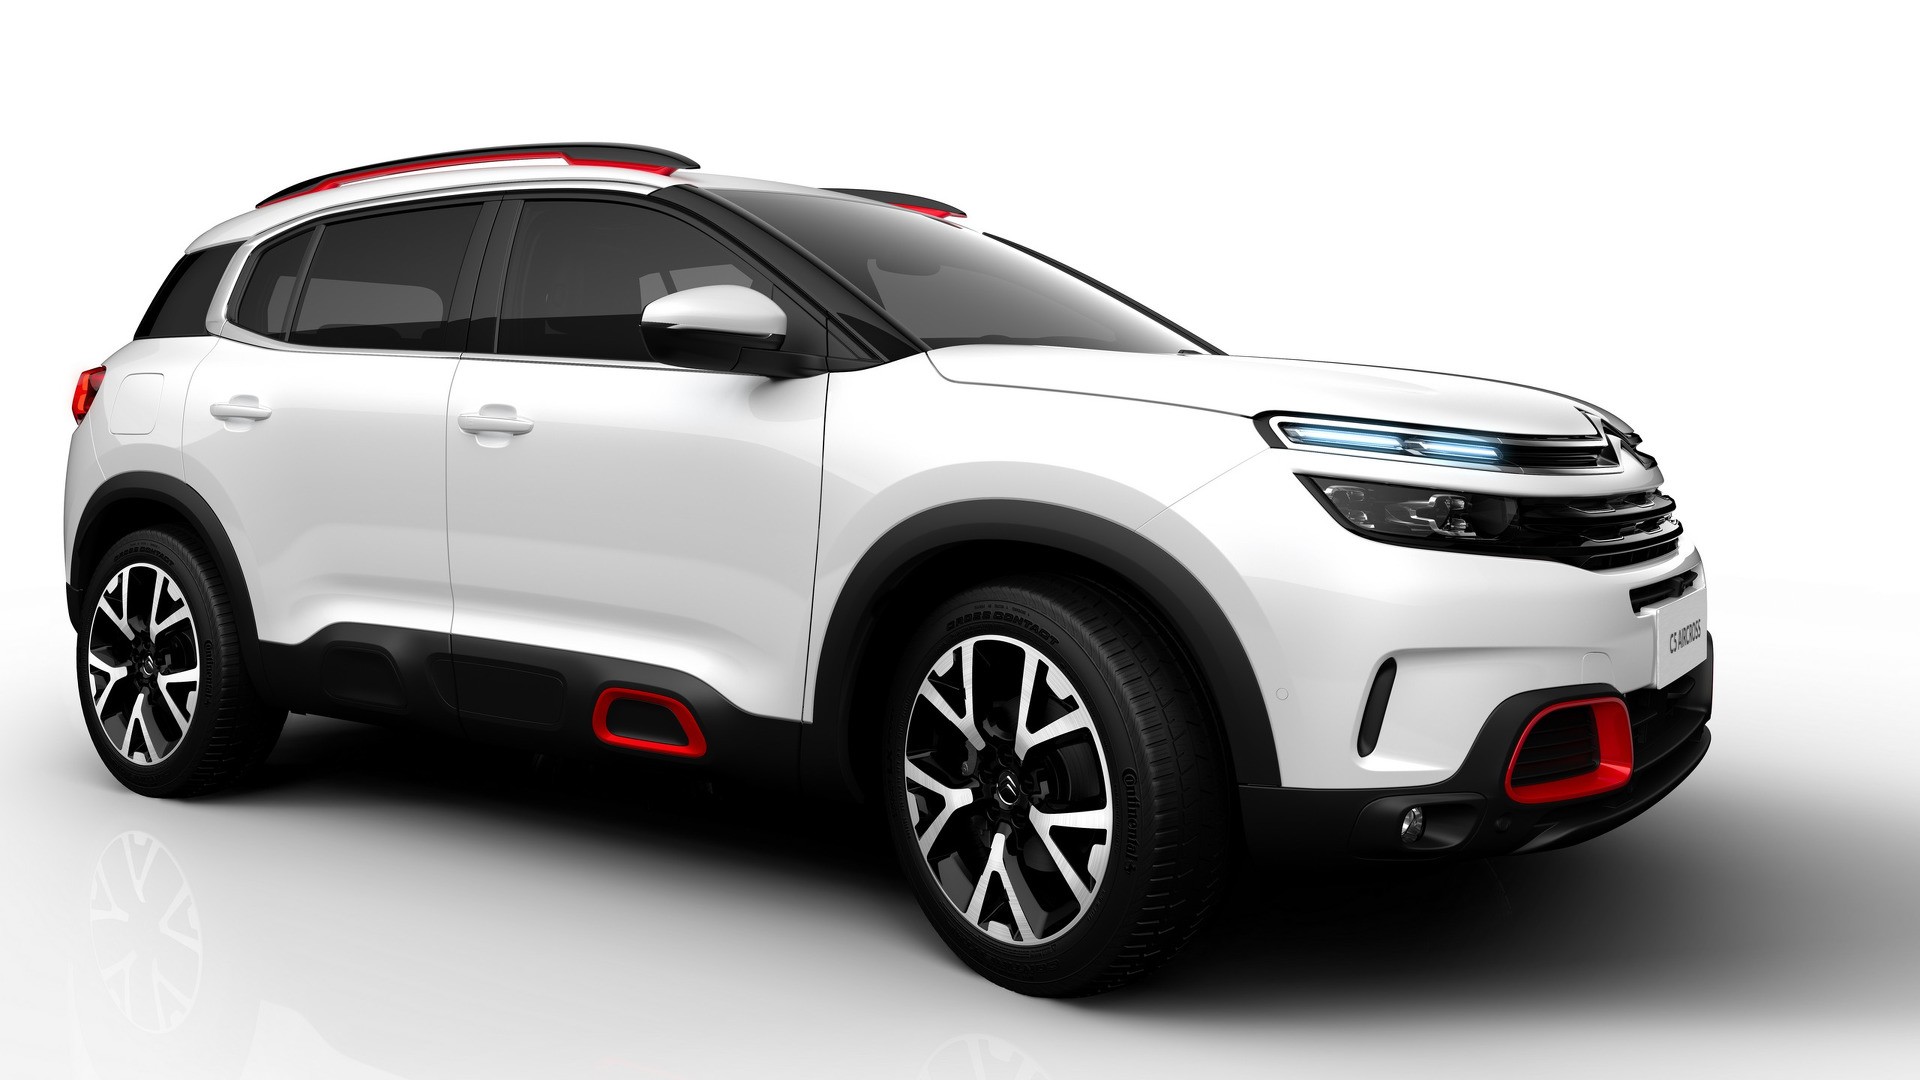 Citroën C5 Aircross SUV: Price, Images, Features & More